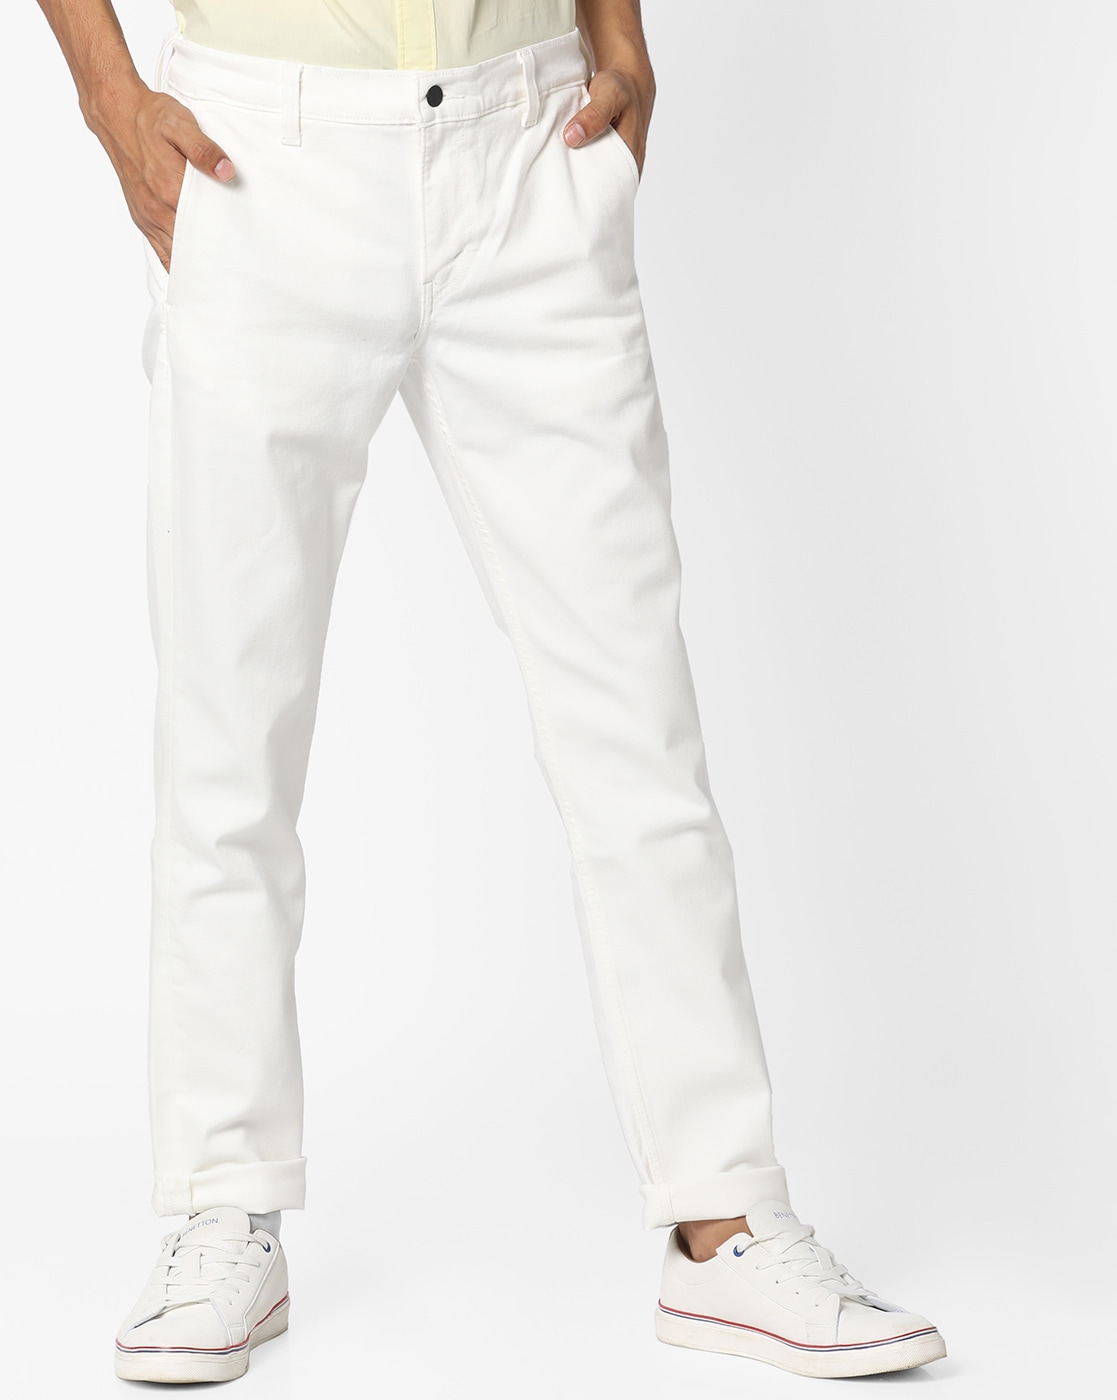 Men's Guide To Styling White Jeans Outfits Correctly | White jeans outfit,  White ripped jeans outfit, Jeans outfit men